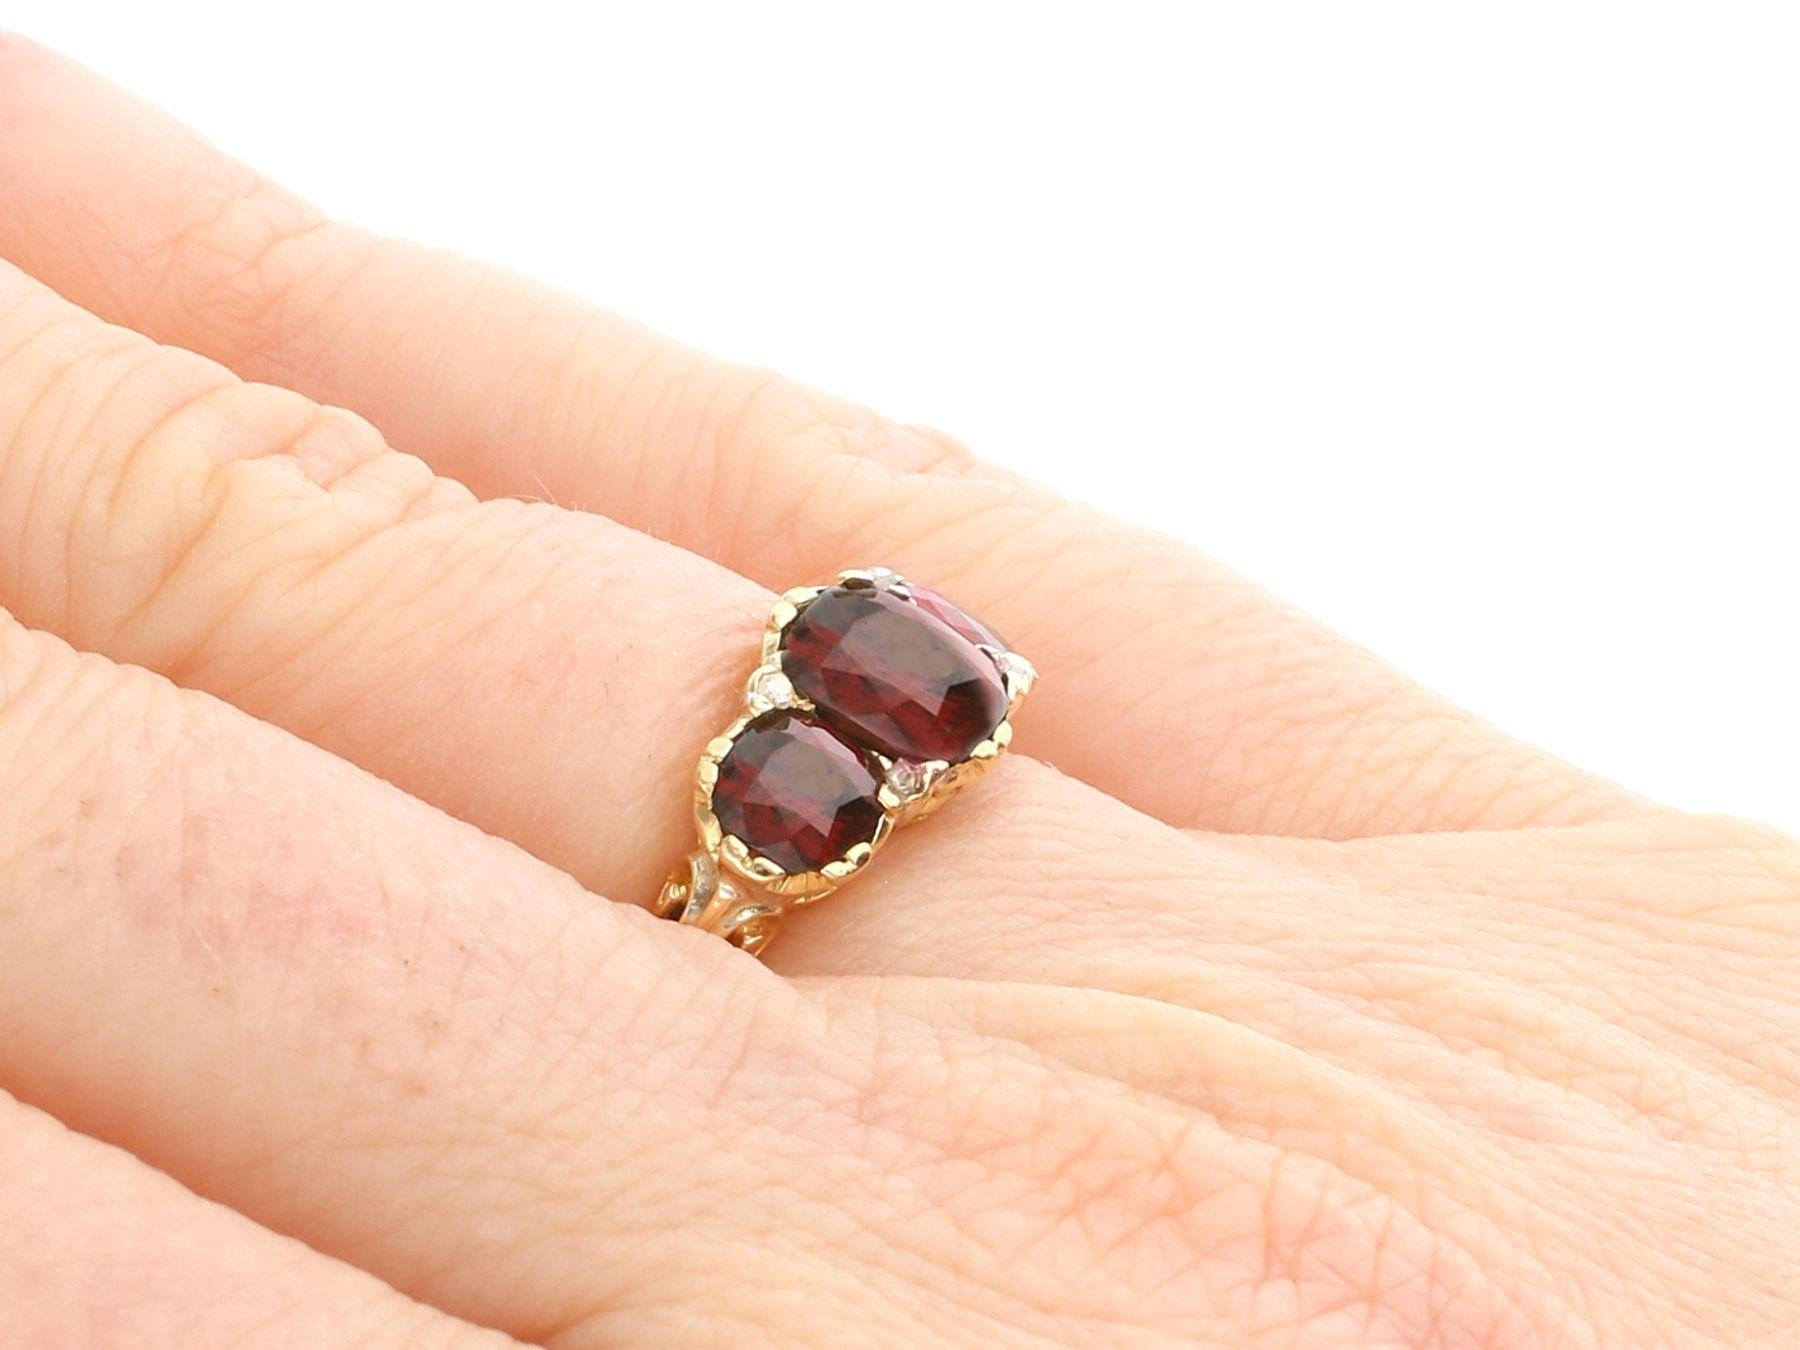 Antique 3.06 Carat Garnet and Diamond Yellow Gold Dress Ring, Circa 1930 In Excellent Condition For Sale In Jesmond, Newcastle Upon Tyne